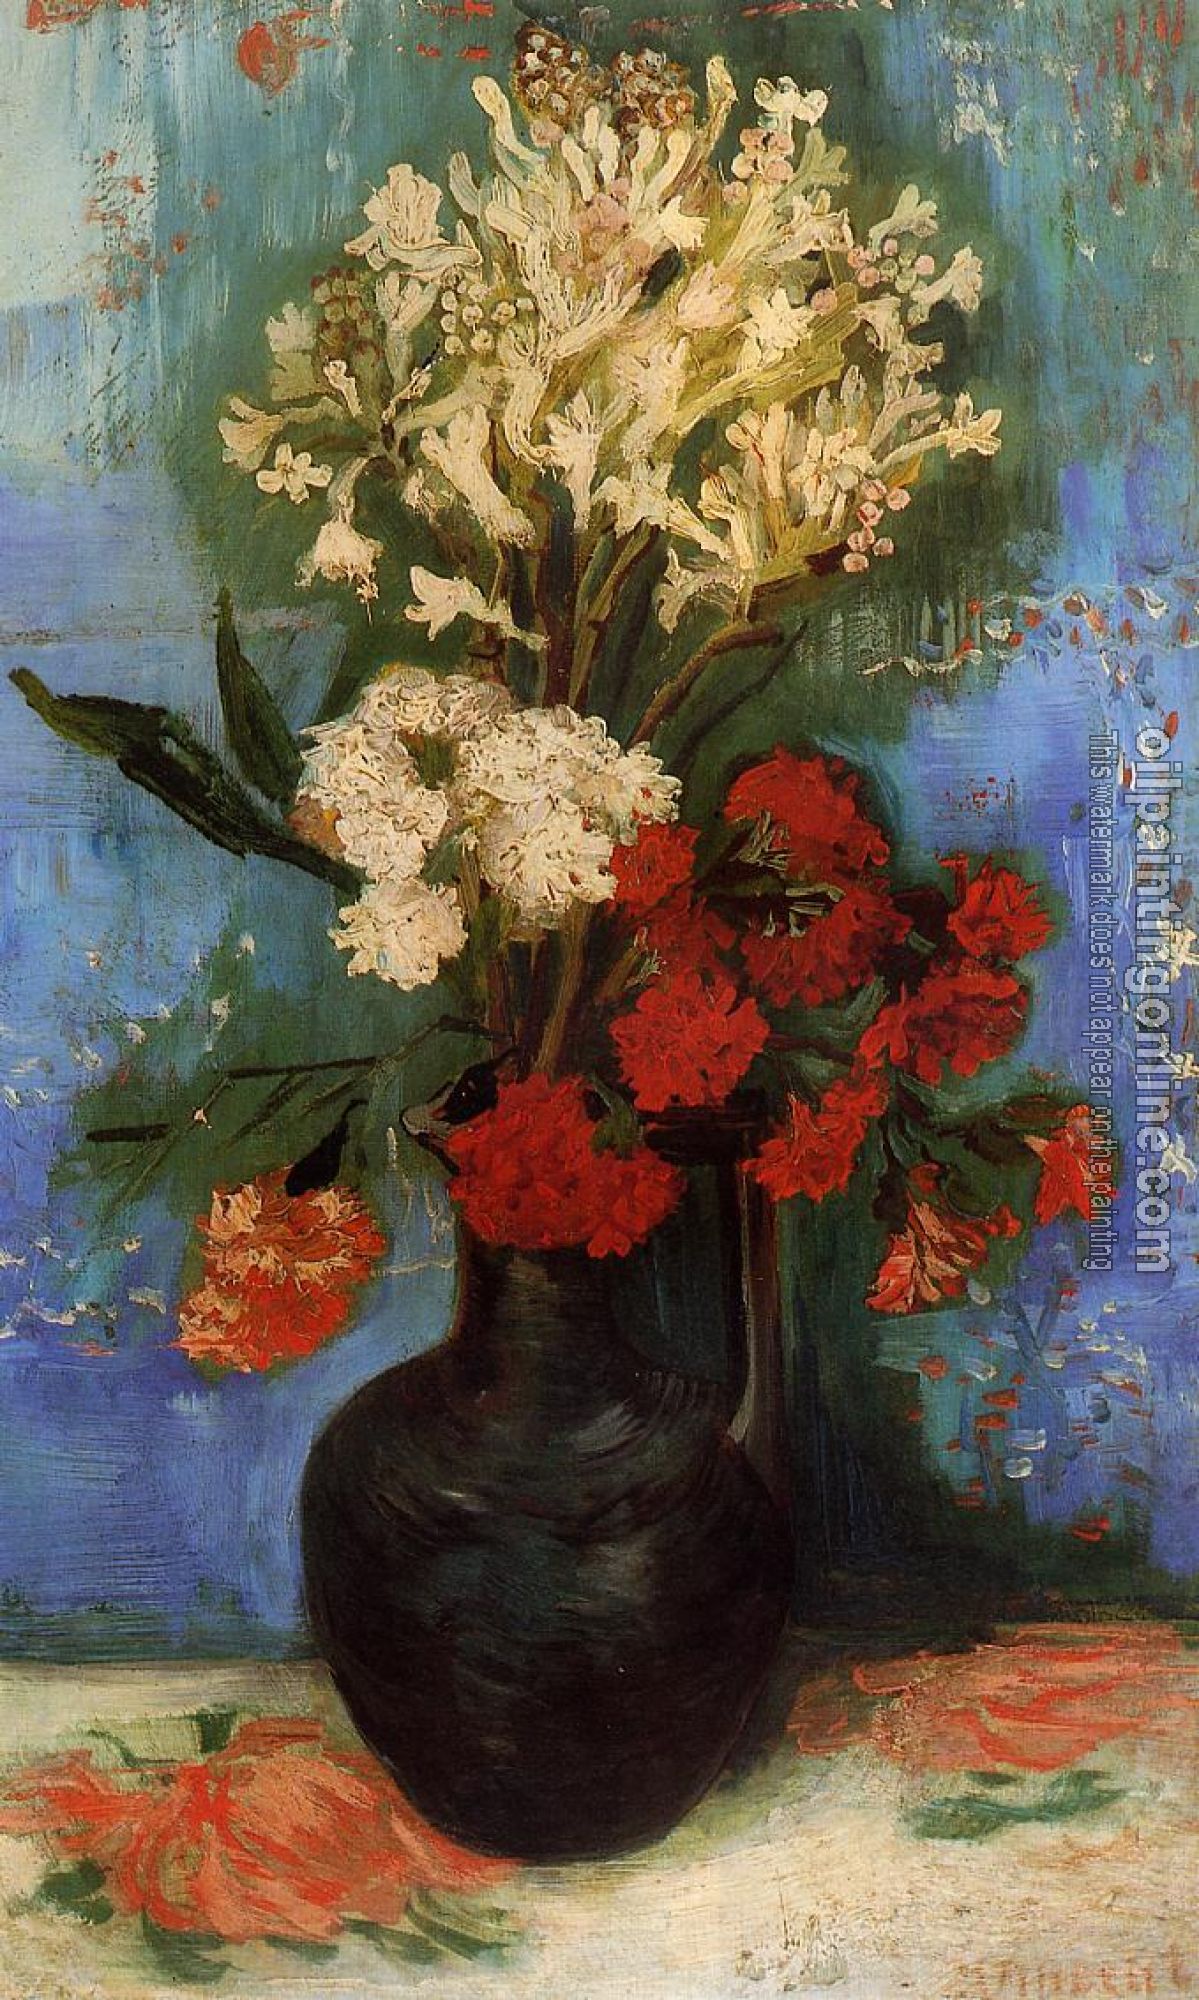 Gogh, Vincent van - Vase with Carnations and Other Flowers